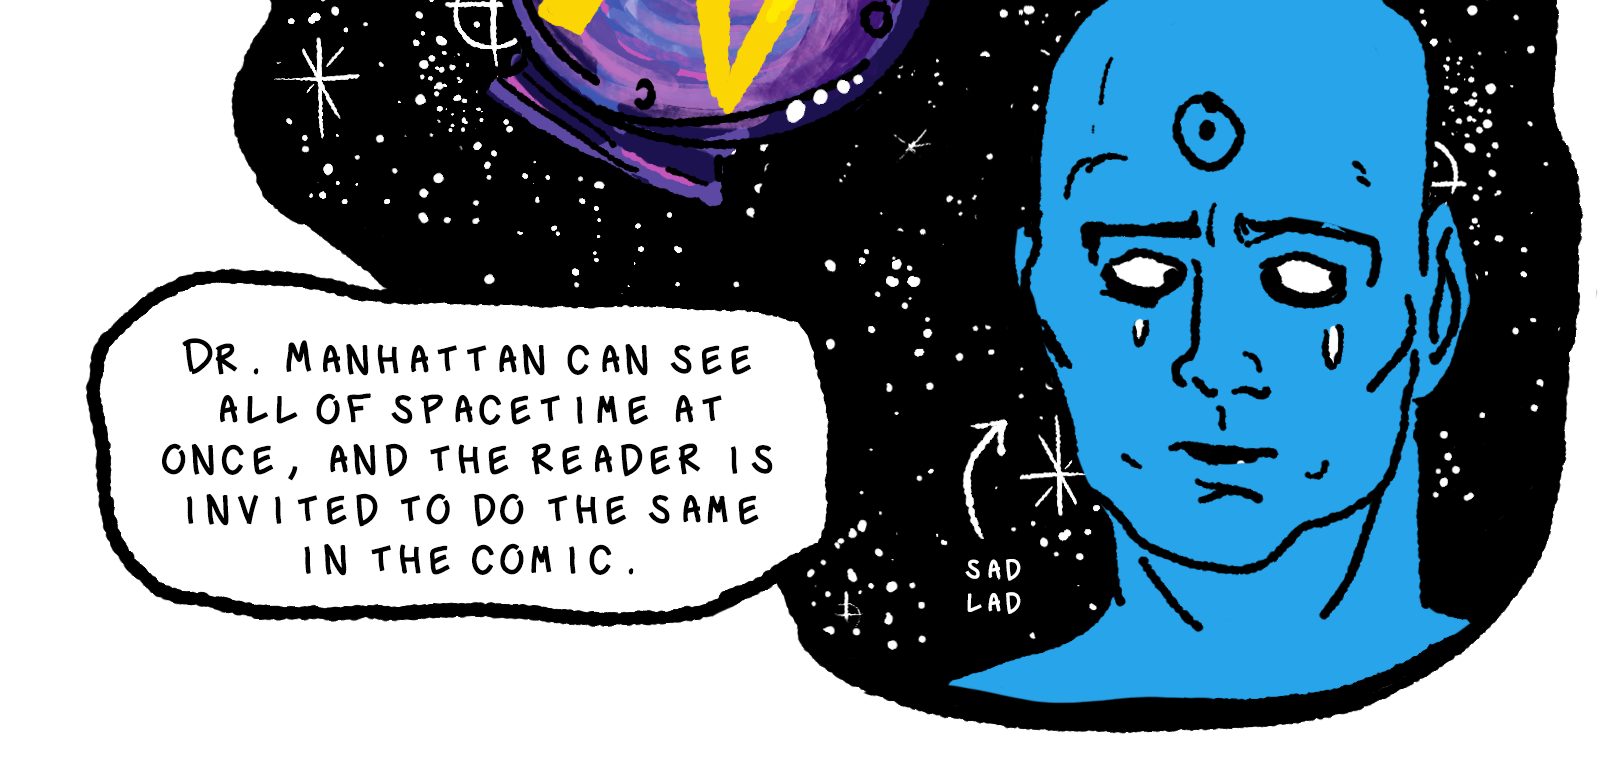 At the bottom corner of this blob of spacetime we see Jon Osterman [link] AKA Dr. Manhattan, a giant blue man with all-white eyes and a symbol of a circle within a circle on his bald forehead. He is crying, and a small arrow pointing at his face labels him as a 'sad lad'. The narration explicates: Dr. Manhattan can see all of spacetime at once, and the reader is invited to do the same in the comic.